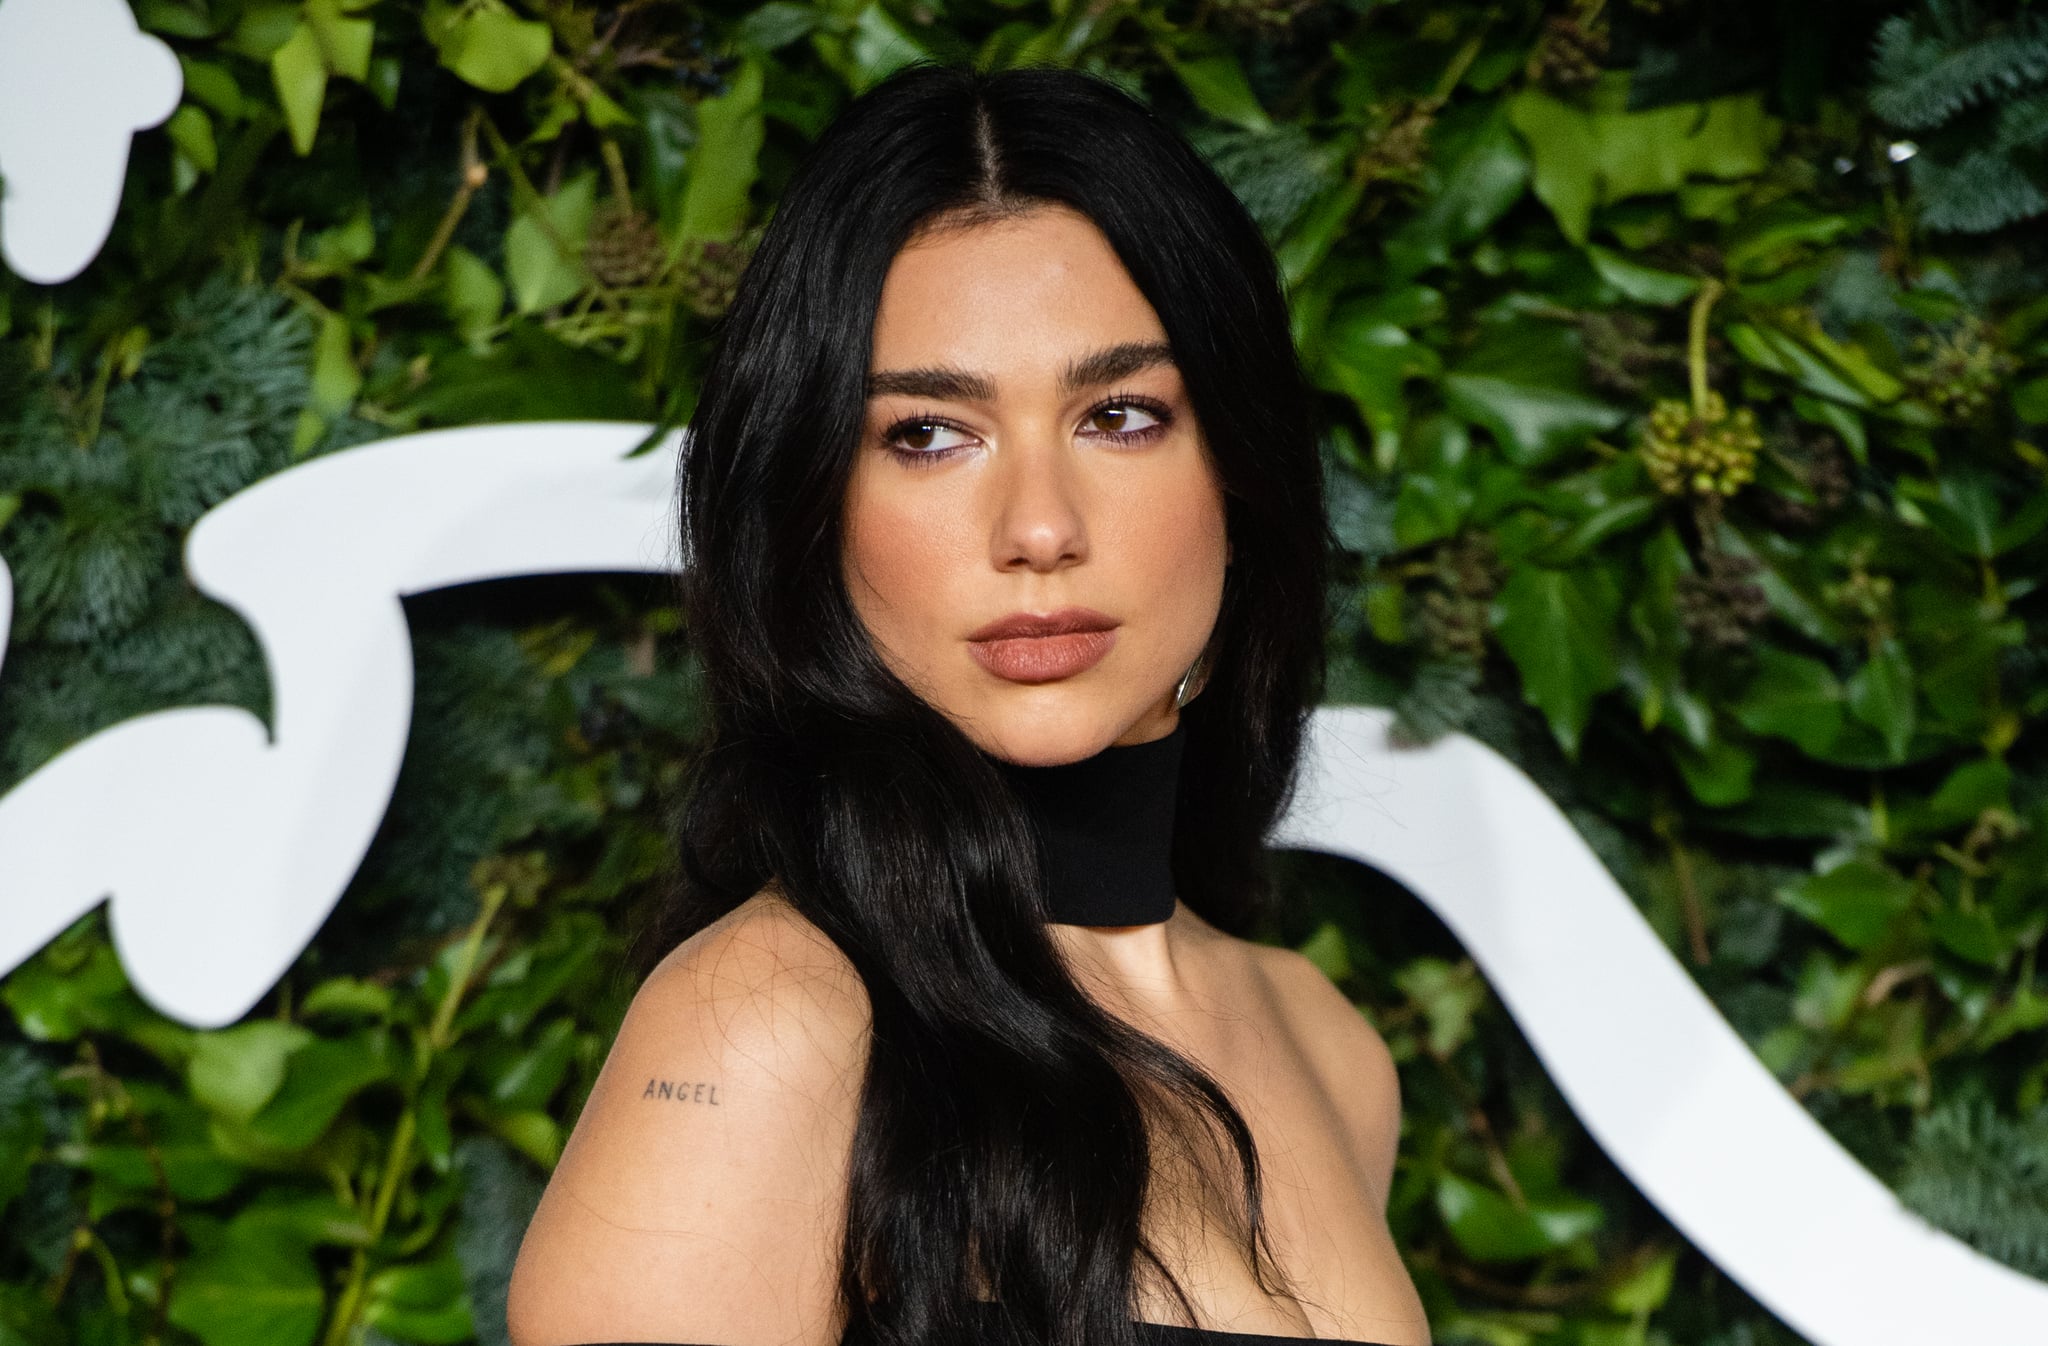 LONDON, ENGLAND - NOVEMBER 29: Dua Lipa attends The Fashion Awards 2021 at the Royal Albert Hall on November 29, 2021 in London, England. (Photo by Samir Hussein/WireImage)